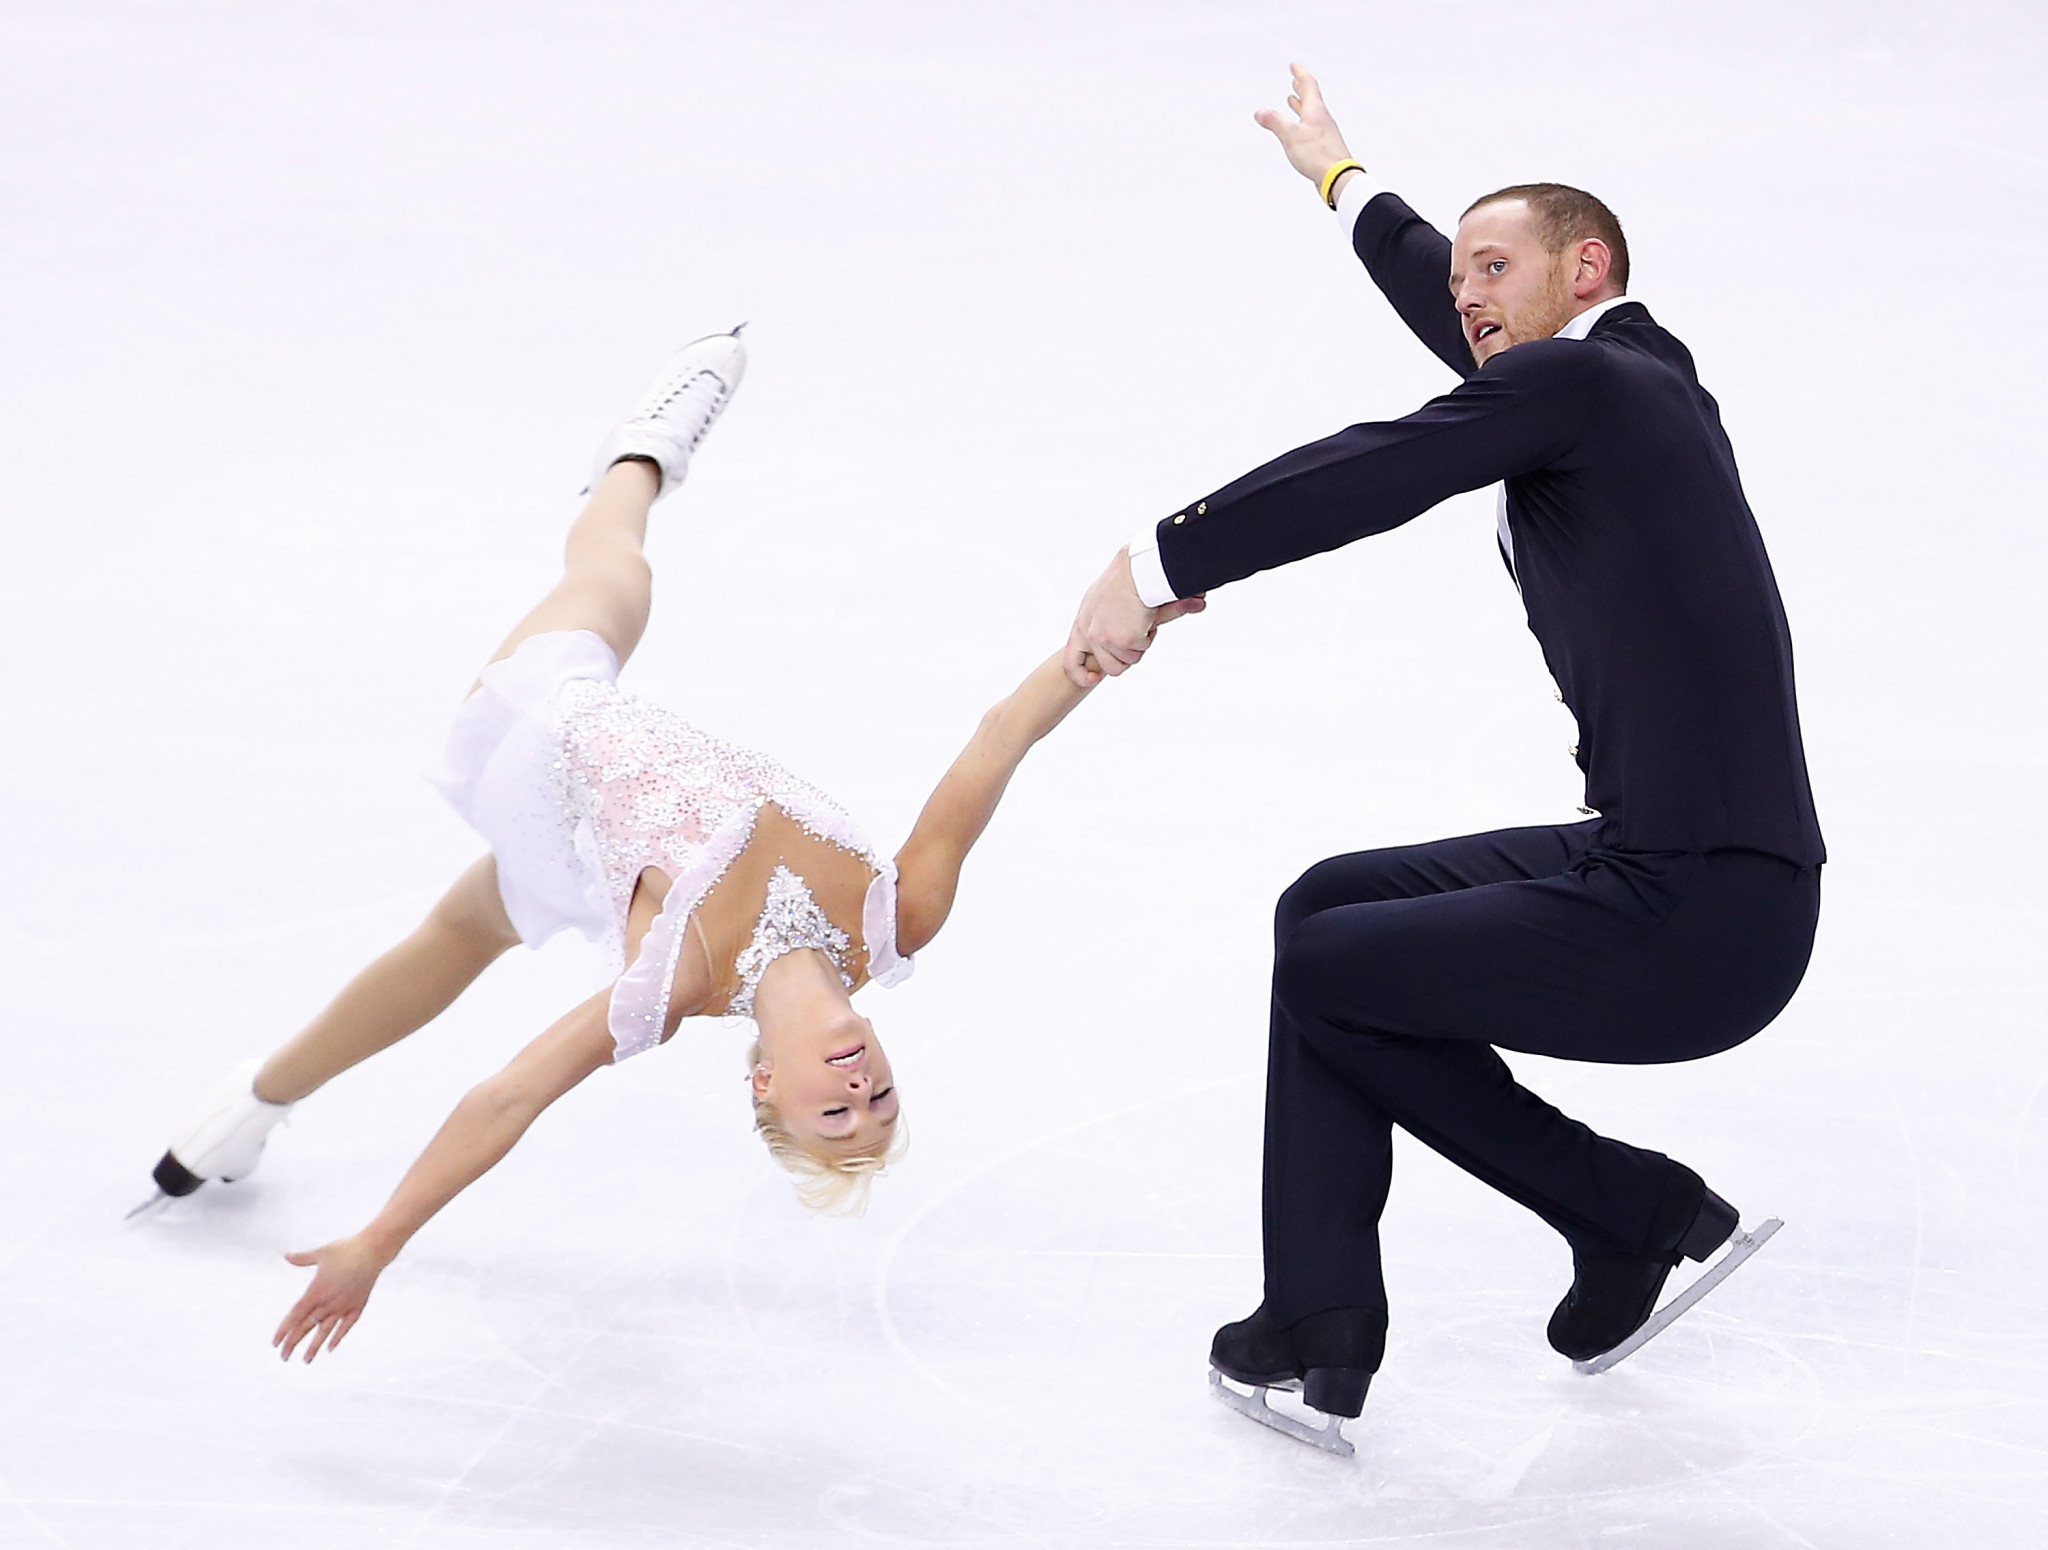 US Center for SafeSport close investigation into late figure skater Coughlin